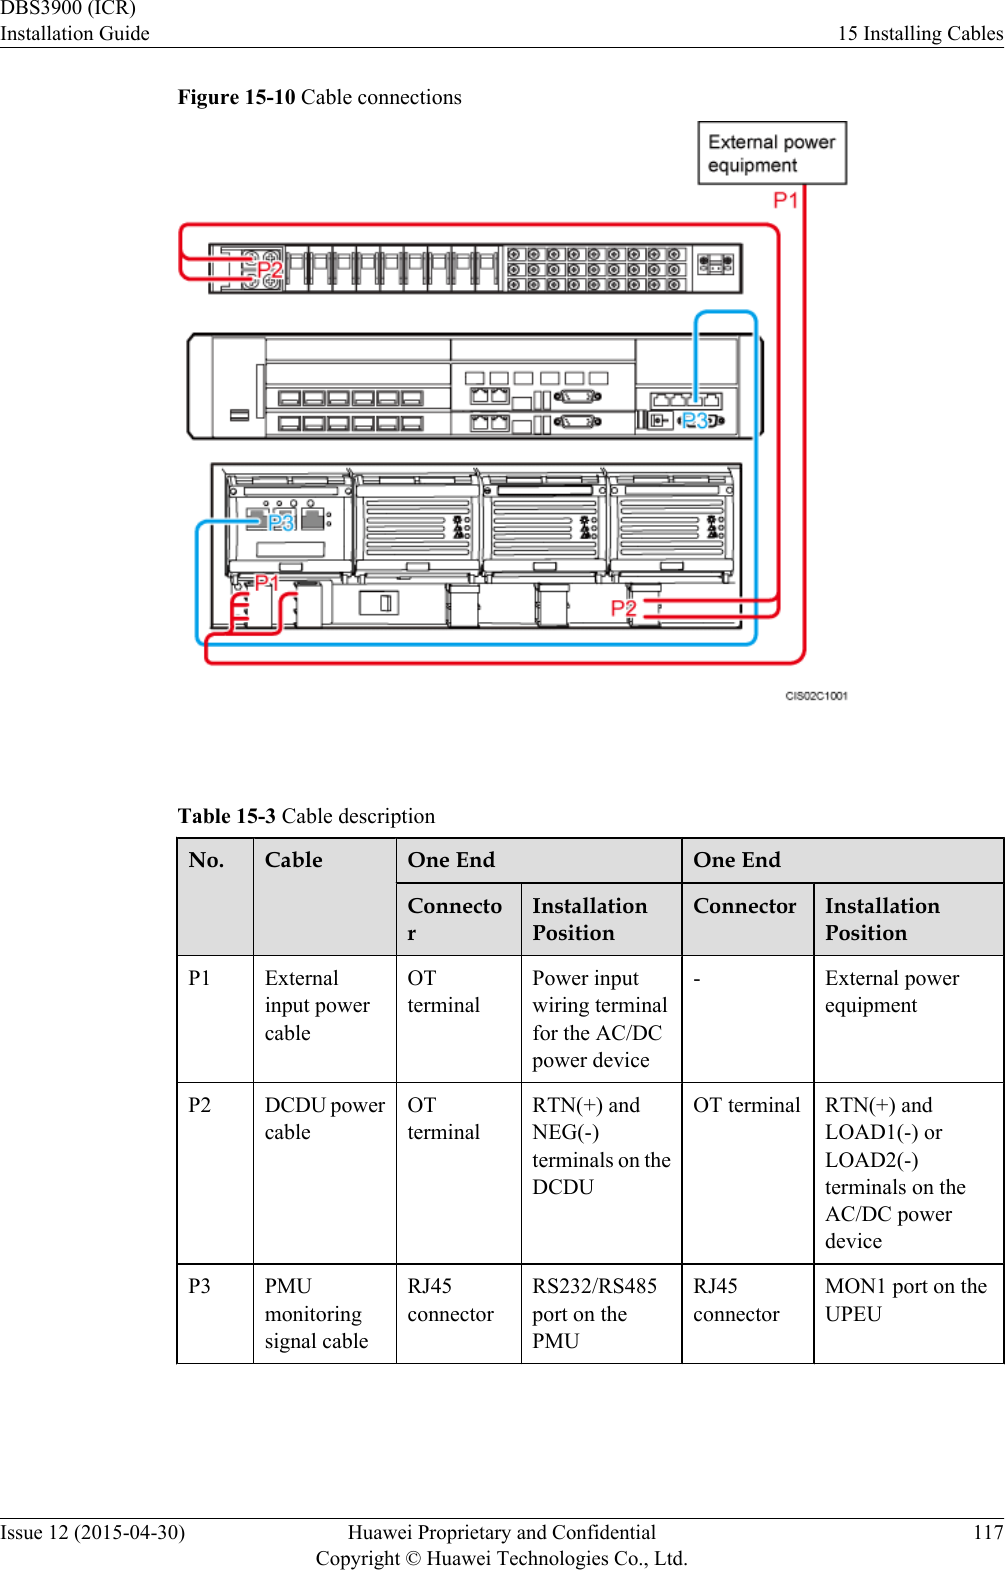 Figure 15-10 Cable connections Table 15-3 Cable descriptionNo. Cable One End One EndConnectorInstallationPositionConnector InstallationPositionP1 Externalinput powercableOTterminalPower inputwiring terminalfor the AC/DCpower device- External powerequipmentP2 DCDU powercableOTterminalRTN(+) andNEG(-)terminals on theDCDUOT terminal RTN(+) andLOAD1(-) orLOAD2(-)terminals on theAC/DC powerdeviceP3 PMUmonitoringsignal cableRJ45connectorRS232/RS485port on thePMURJ45connectorMON1 port on theUPEU DBS3900 (ICR)Installation Guide 15 Installing CablesIssue 12 (2015-04-30) Huawei Proprietary and ConfidentialCopyright © Huawei Technologies Co., Ltd.117